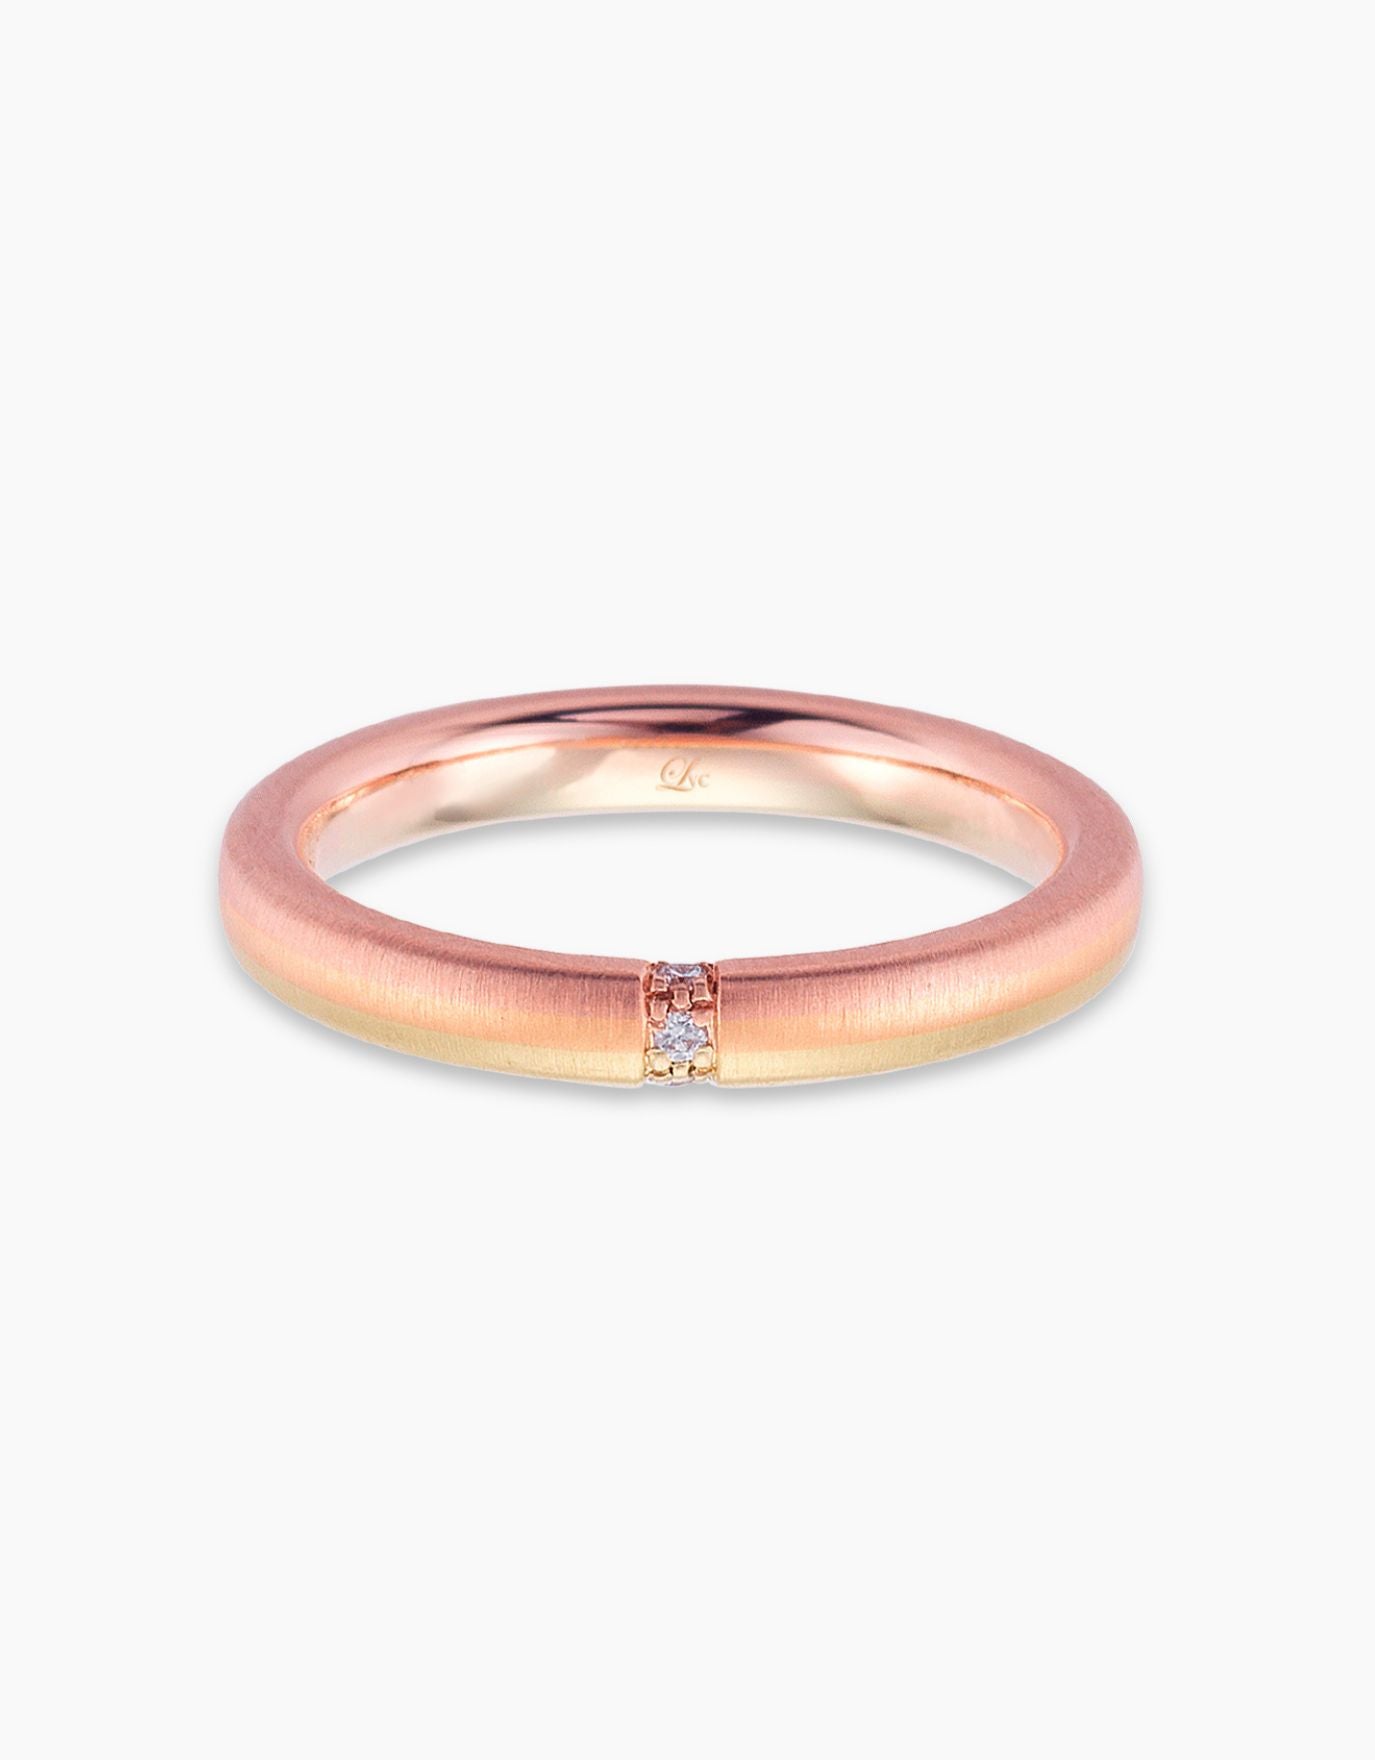 LVC Soleil Sunrise Wedding Band in Three Textures of Gold